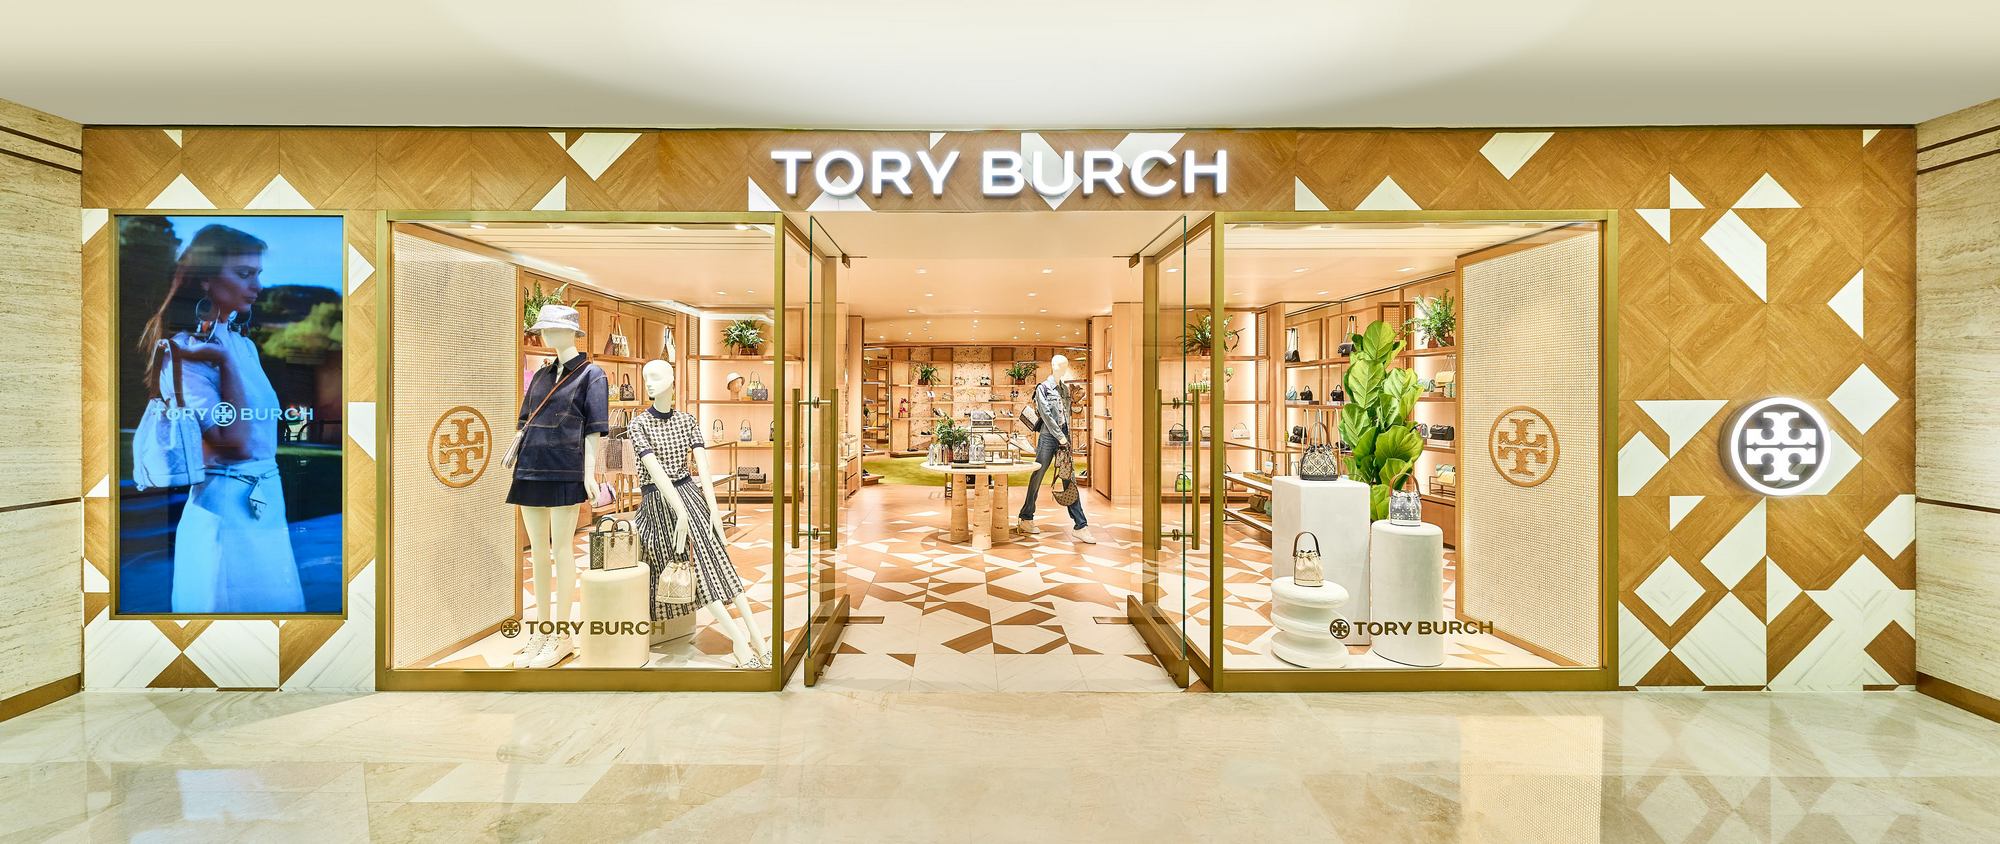 TAM SON WELCOMES TWO NEW BRANDS: TORY BURCH AND DIPTYQUE - Openasia Group